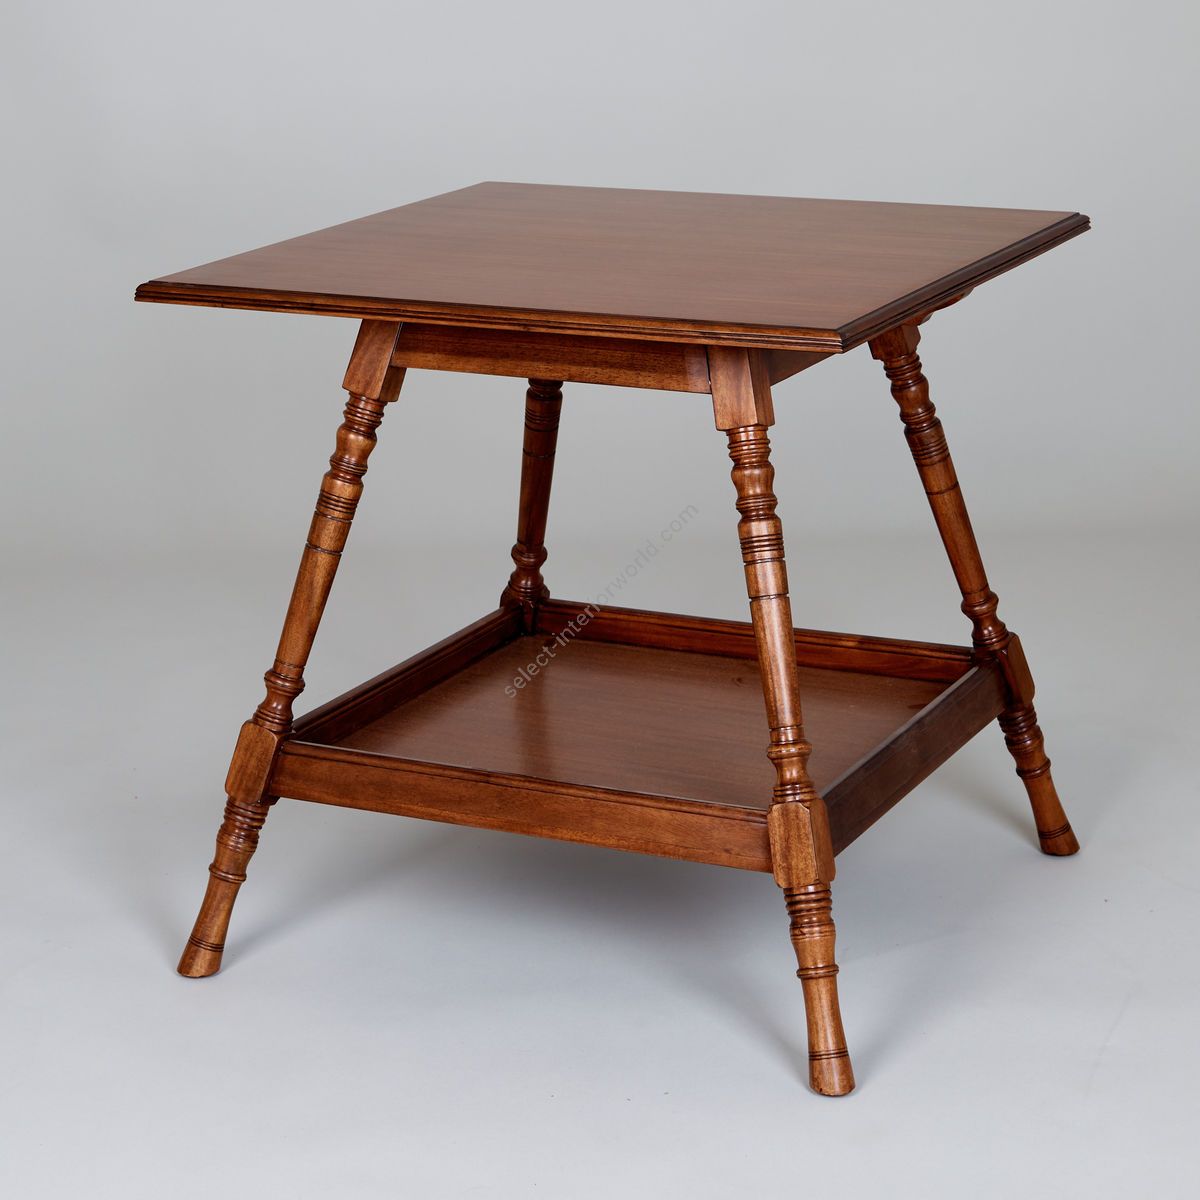 Vaughan / Morestead Table / FT0128